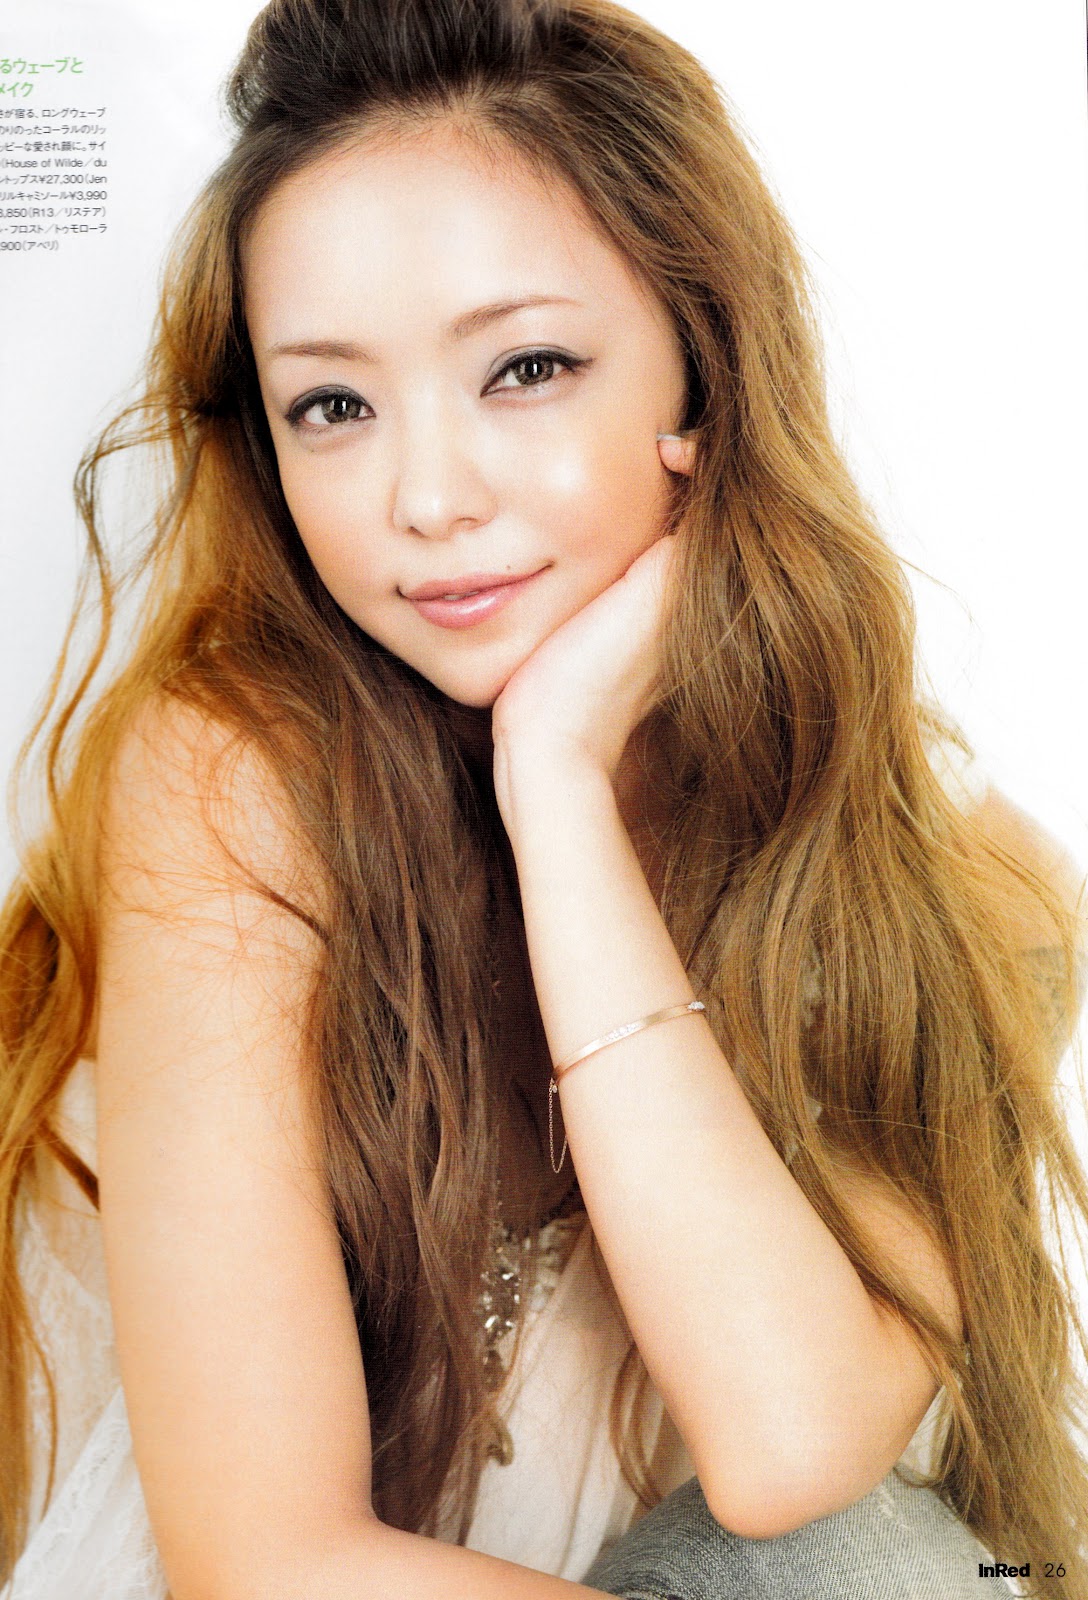 Namie Amuro News Area: 'In Red' July 2012 (HQ)